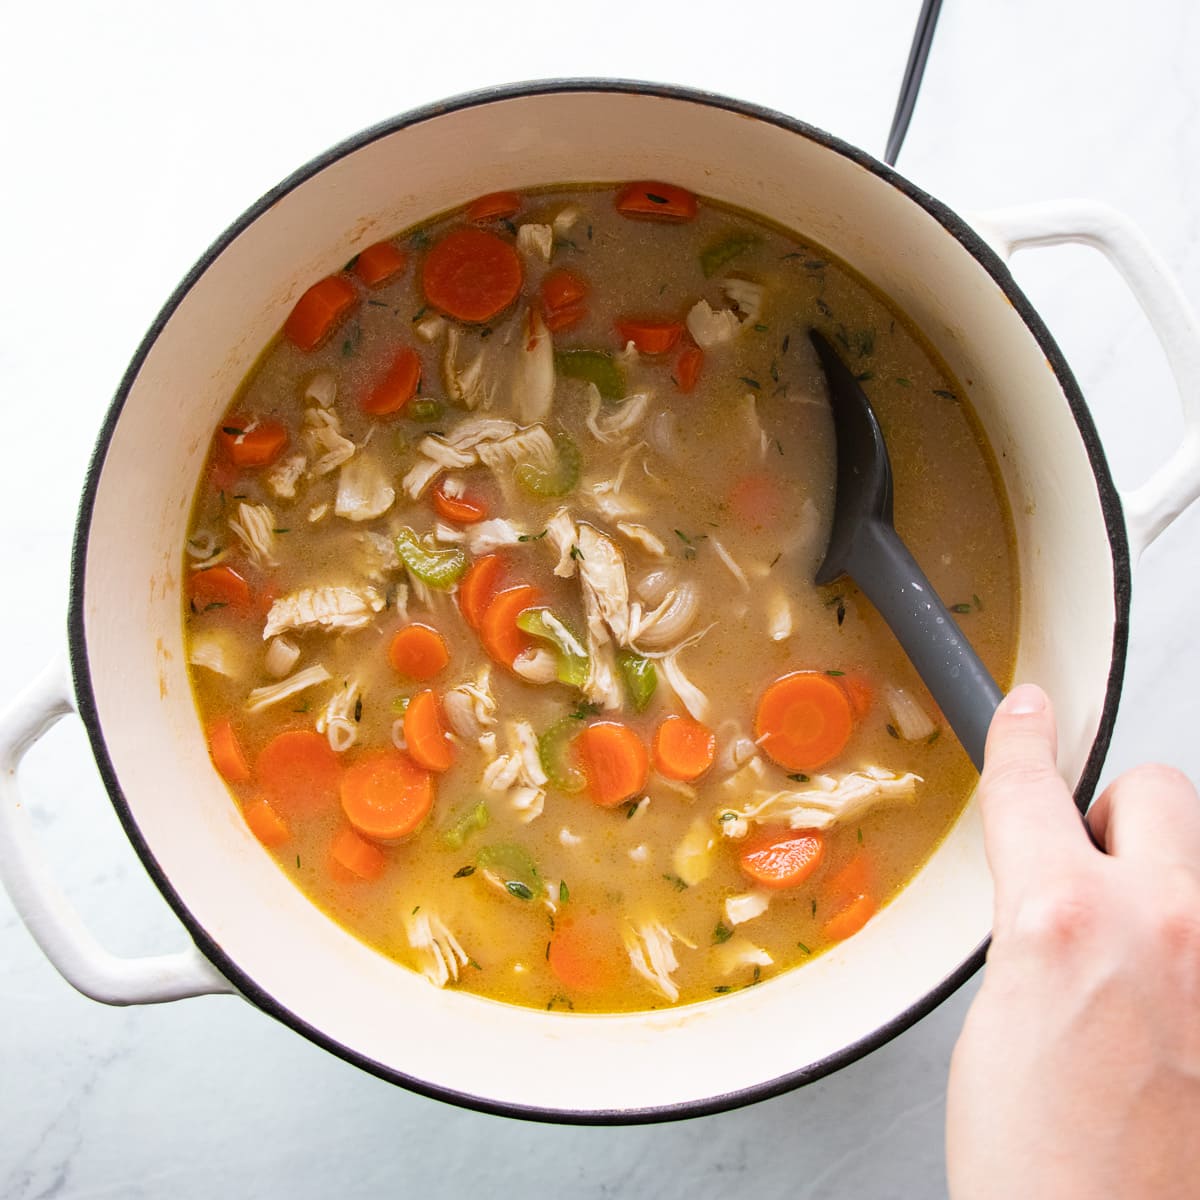 Stirring lemon juice and cubed cooked chicken into the white soup containing low FODMAP chicken noodle soup.